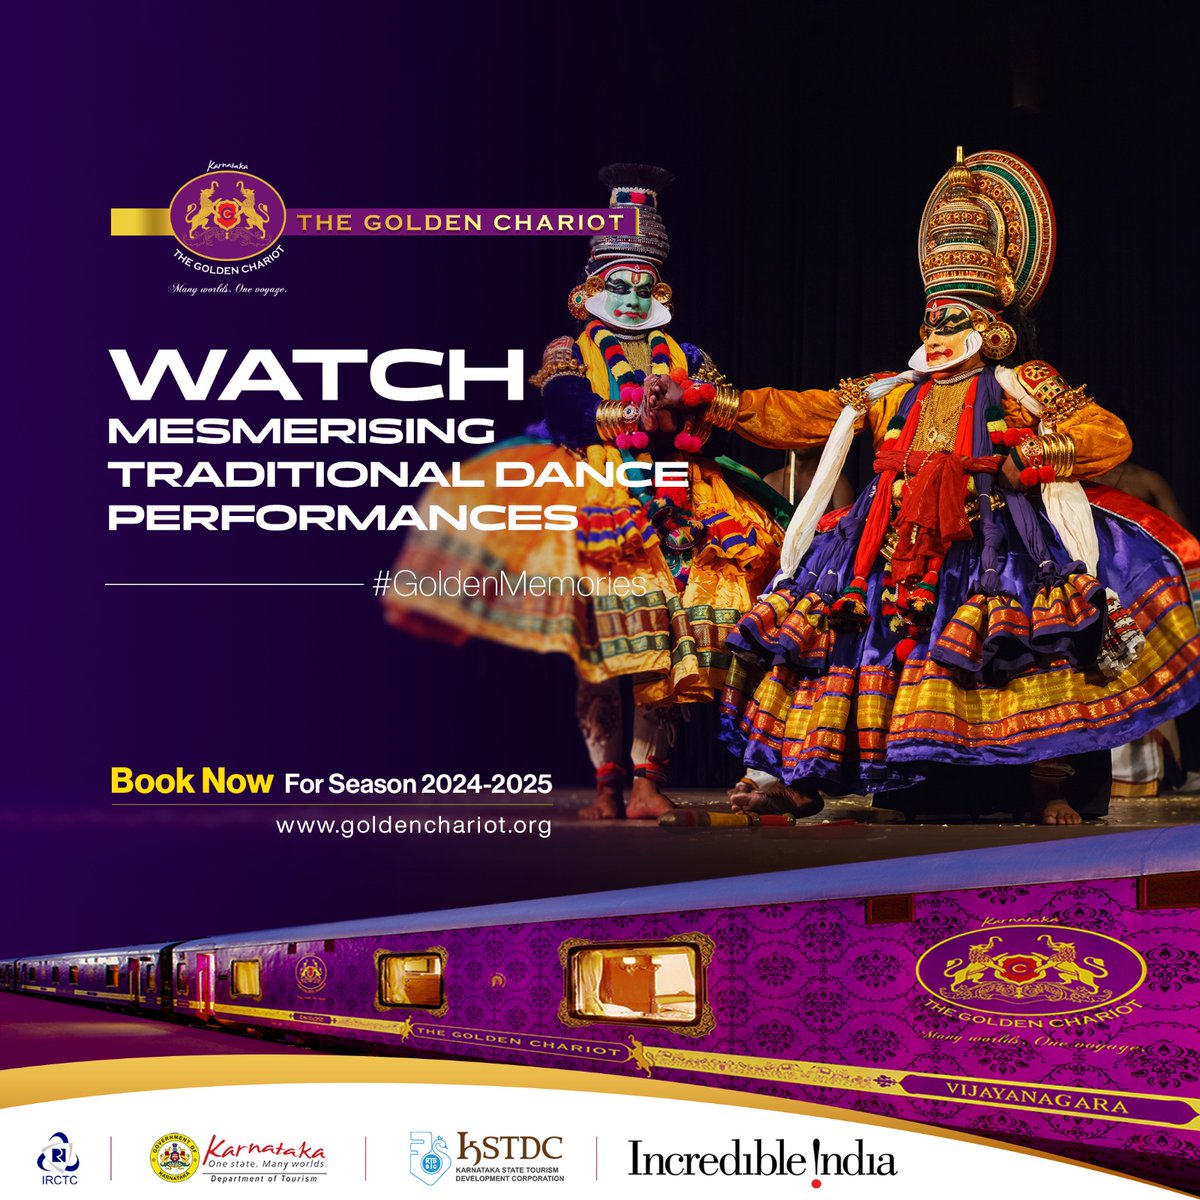 Be prepared to be mesmerised by the tranditional dance performance in Kochi. To create #GoldenMemories aboard the #GoldenChariot, click on goldenchariot.org #goldenchariot #travelindia #luxurytravel #SouthIndia #travellife #BucketListAdventure #IncredibleIndia #travel